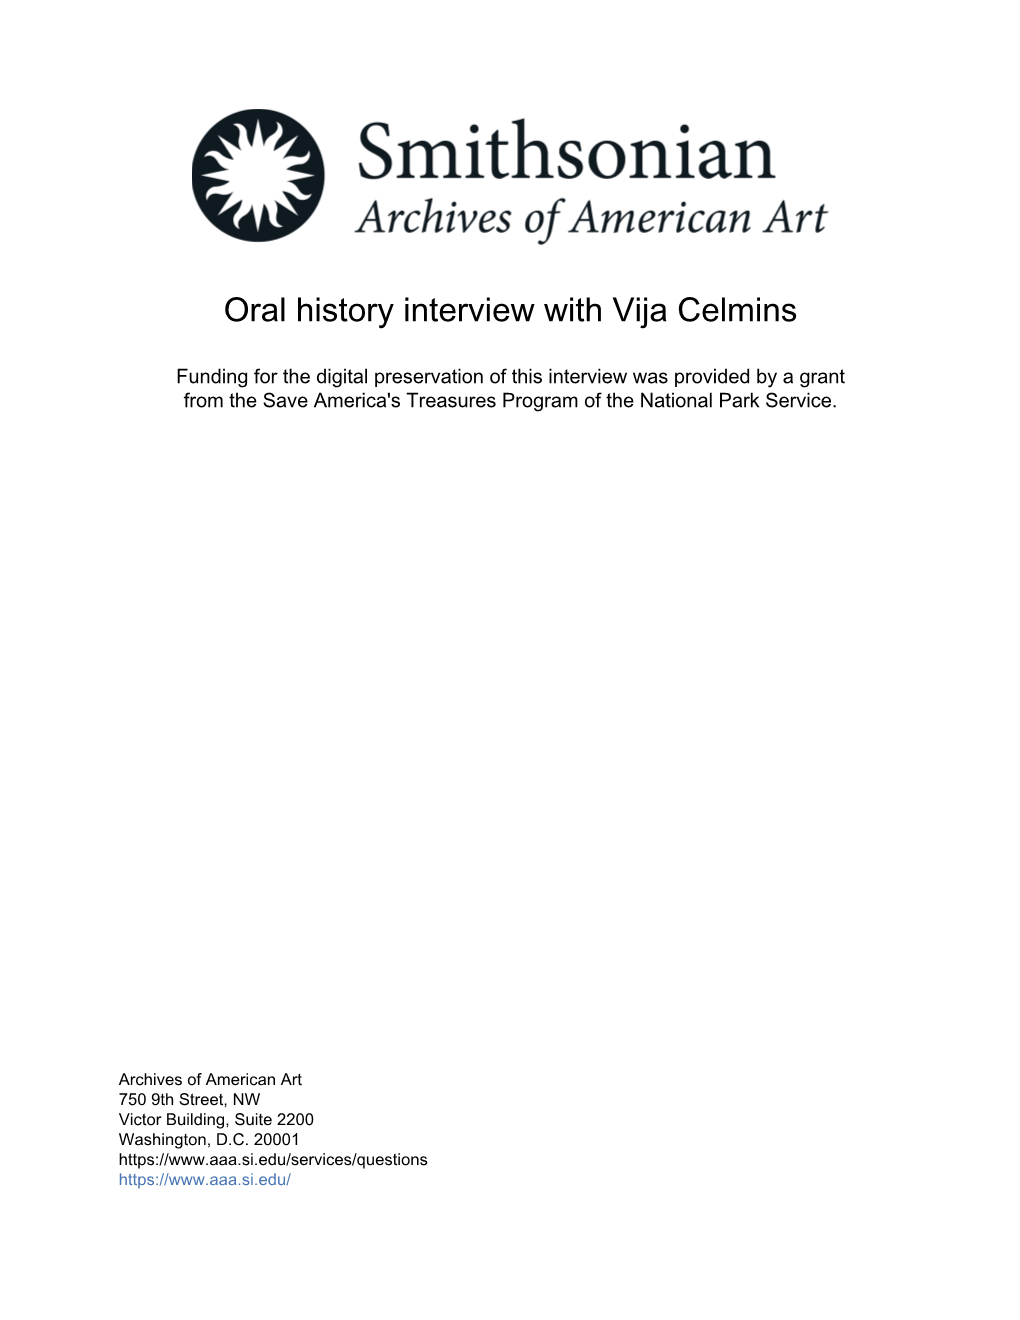 Oral History Interview with Vija Celmins